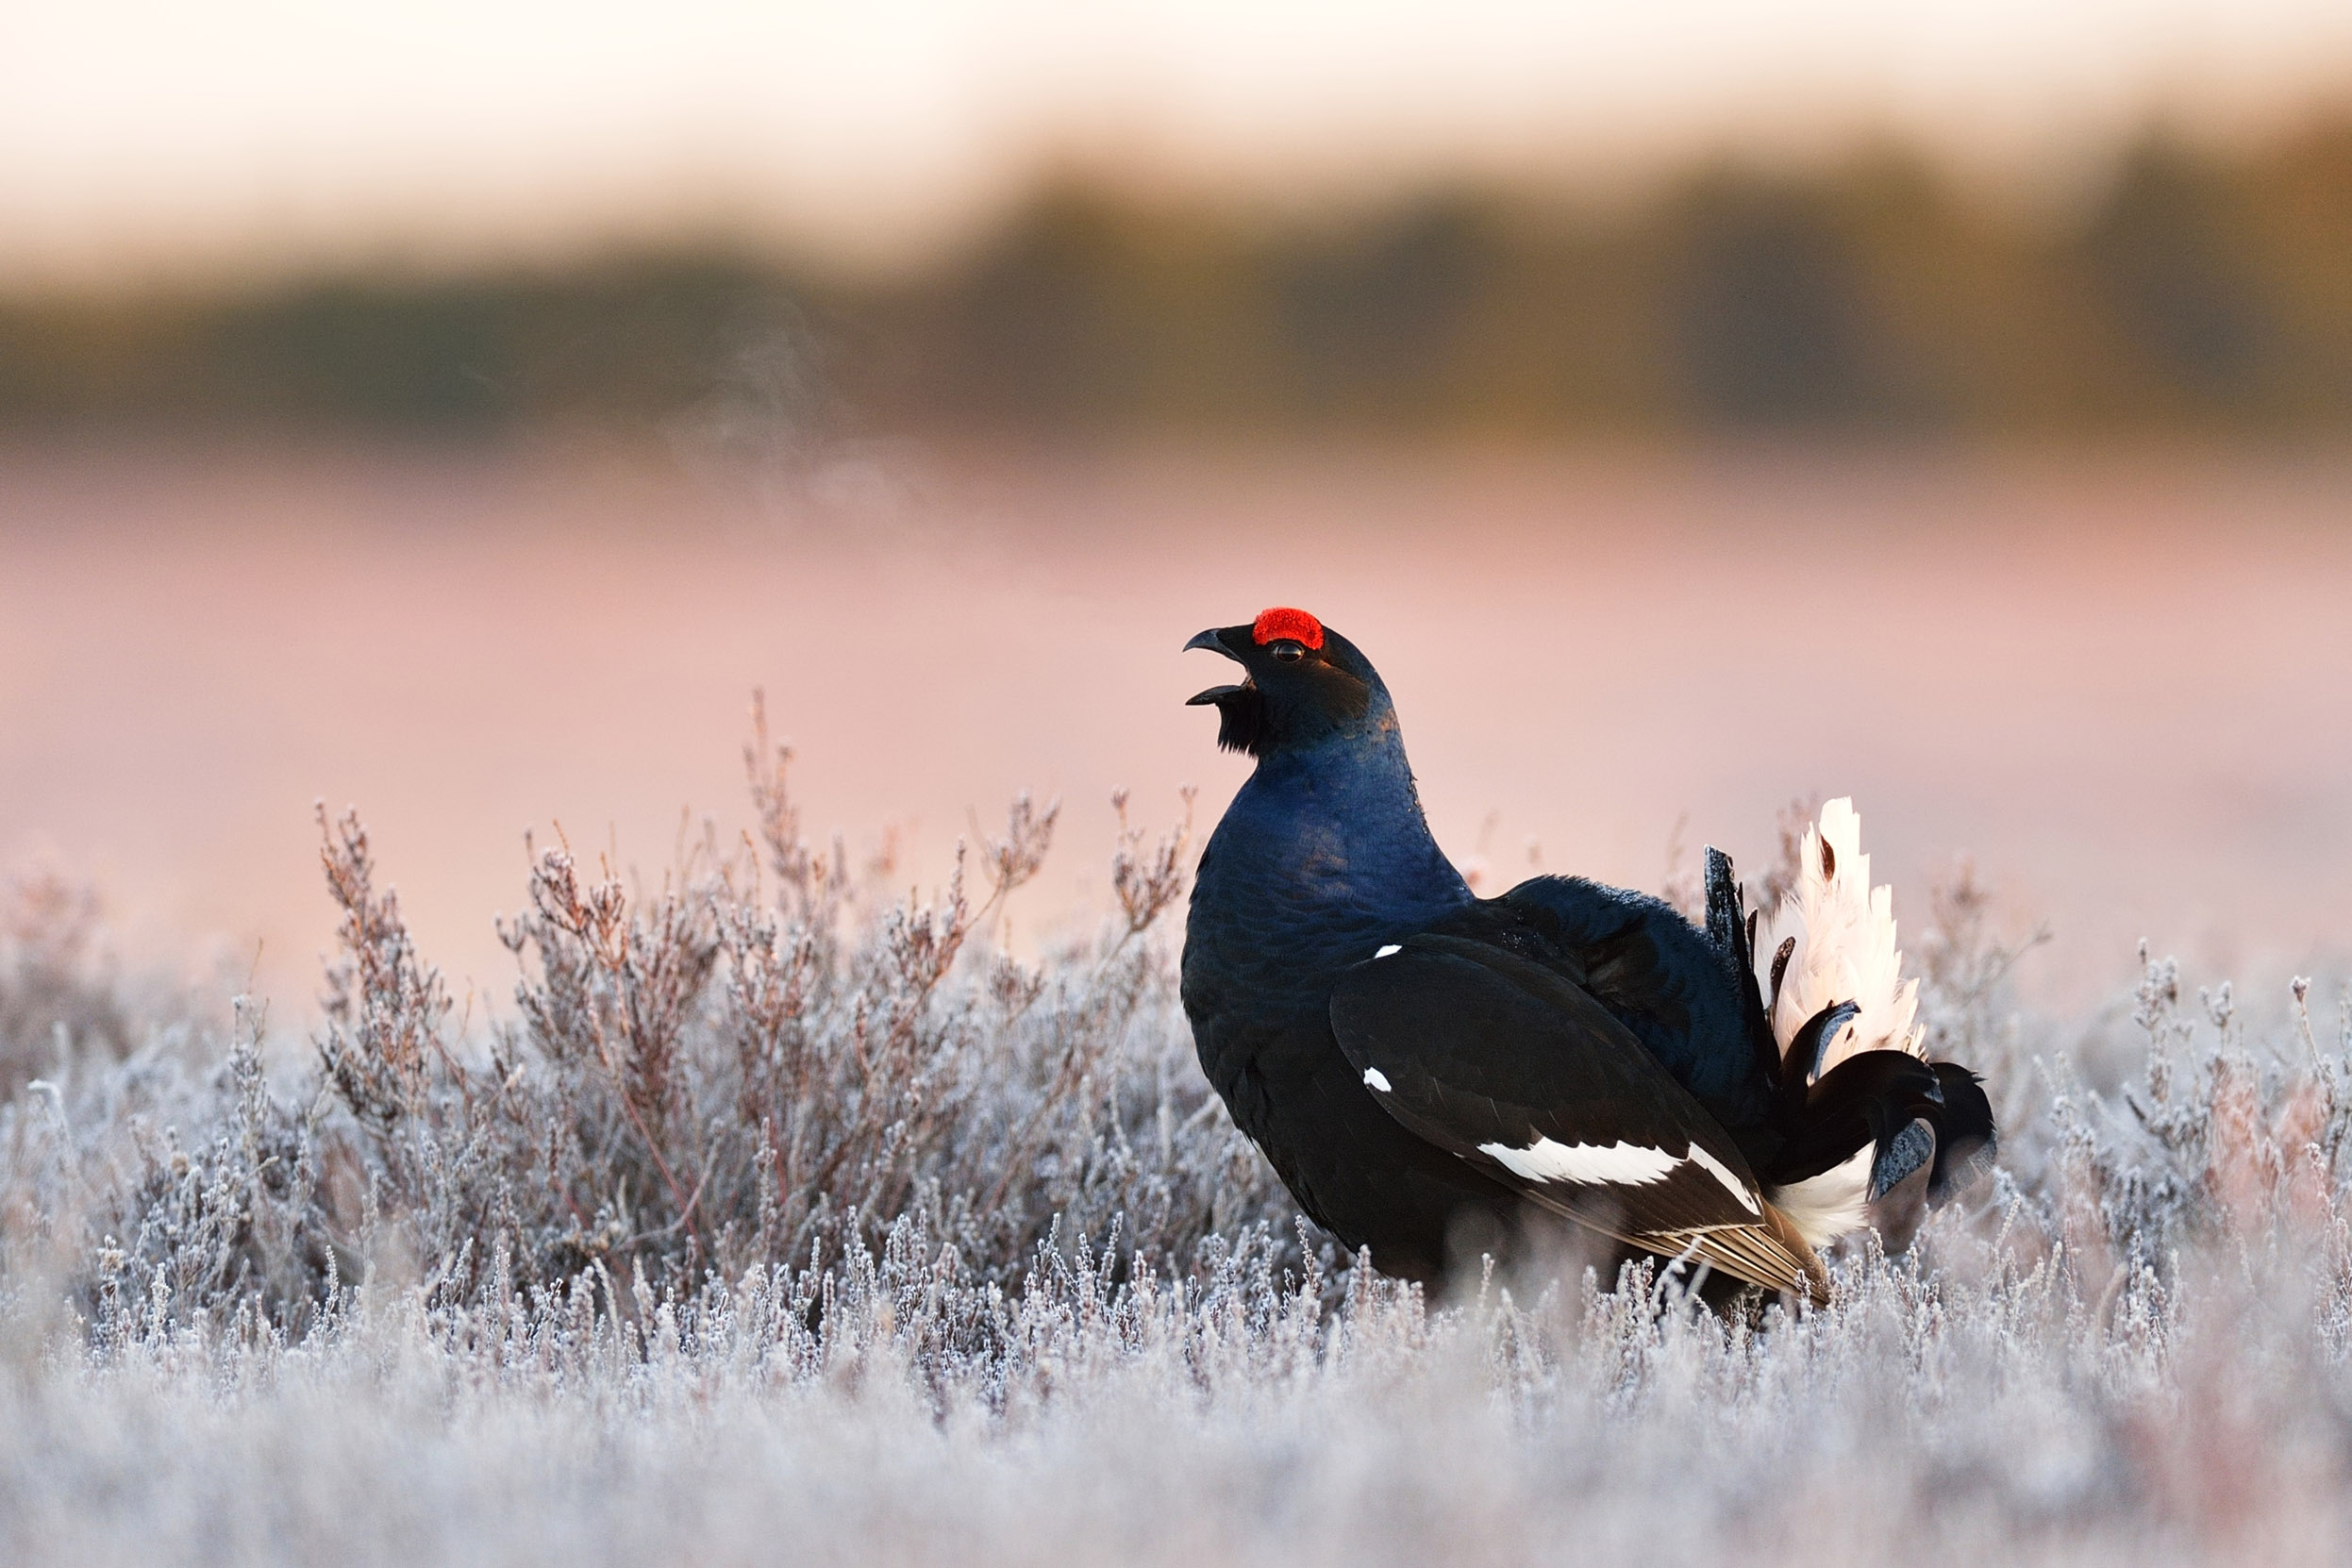 A lone Black Grouse looking striking as they walk across a frosty moorland.